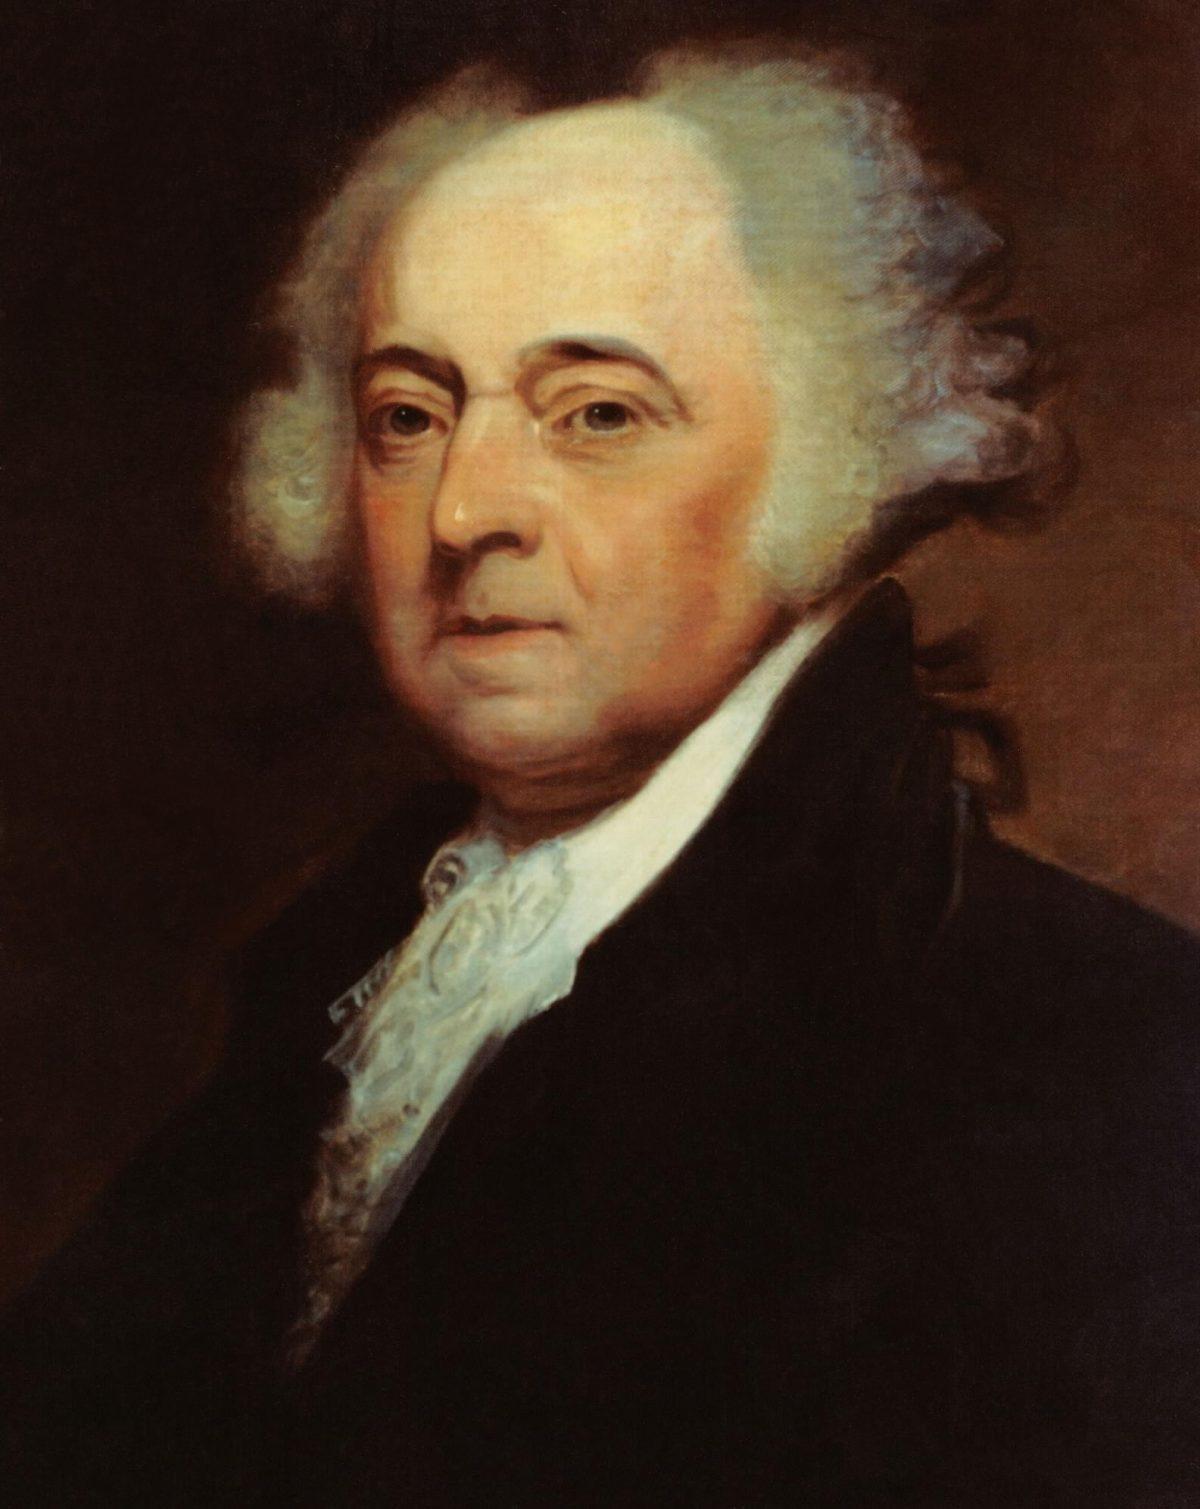 A portrait of President John Adams (1735–1826), second president of the United States, by Asher B. Durand. (Public Domain)